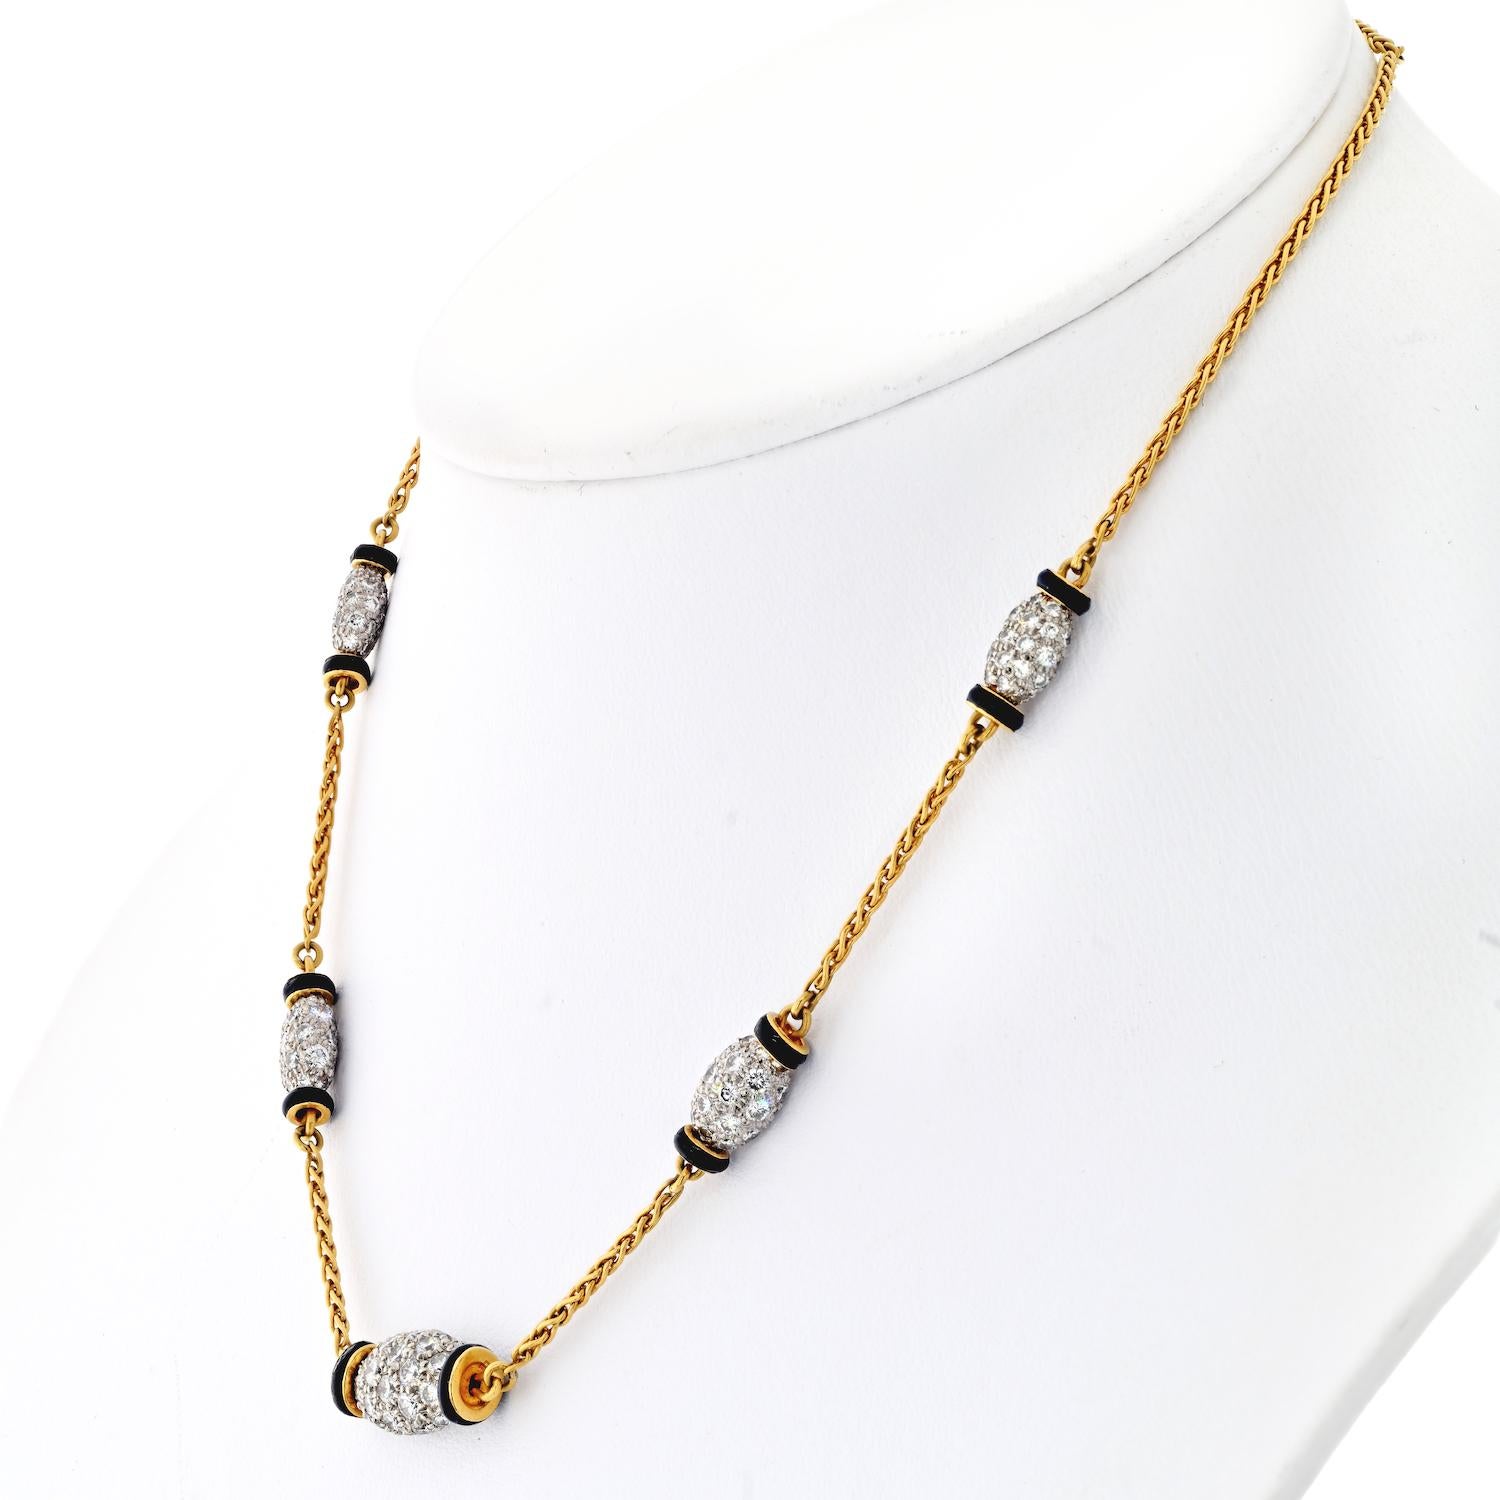 David Webb is a renowned American jewelry designer who is known for his bold and striking creations. The Platinum & 18K Yellow Gold Night Cap 5 Station Black Enamel Necklace is a testament to his design prowess. This necklace features five stations